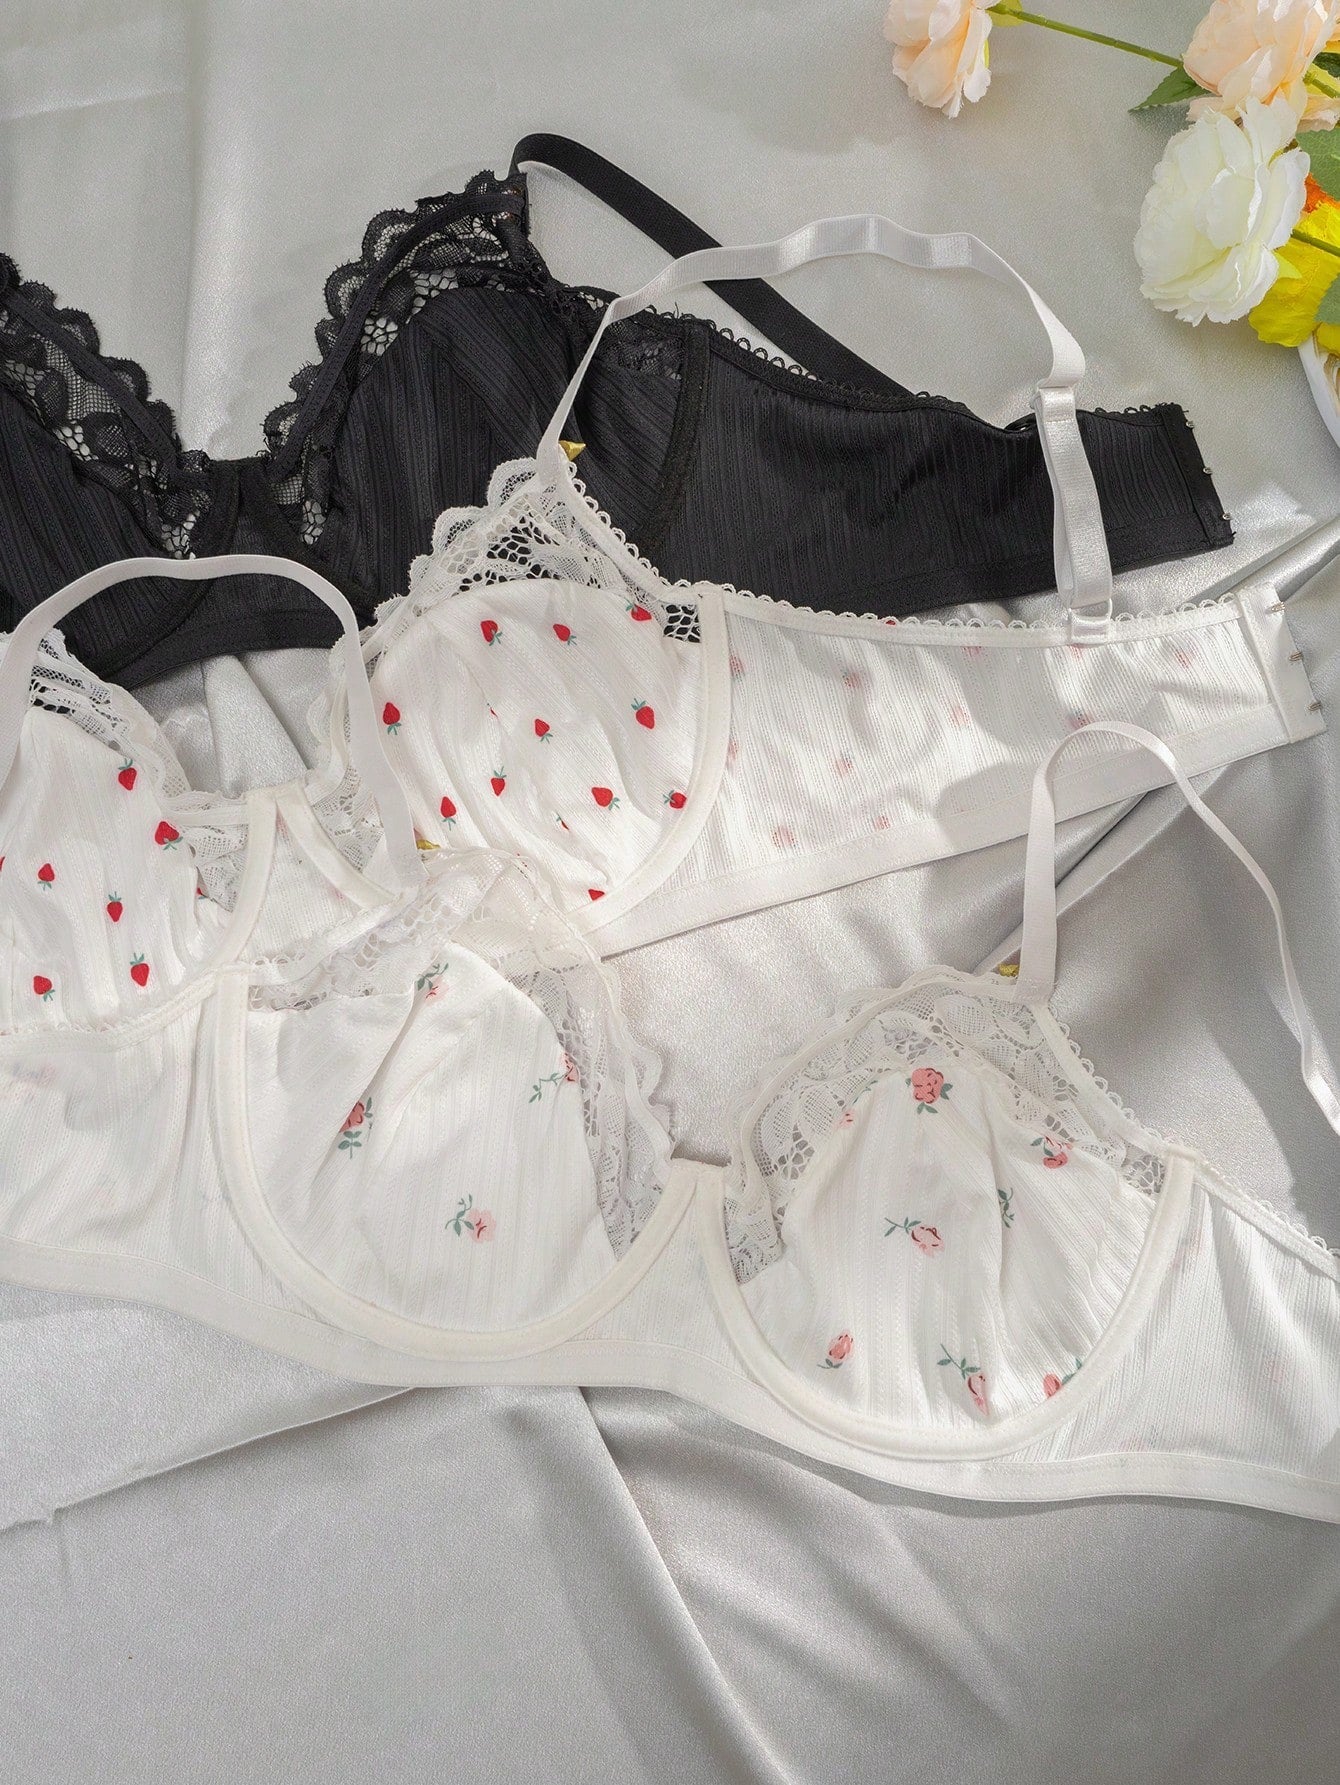 Stylish Matching Bra and Panty Sets for Every Occasion – Negative Apparel